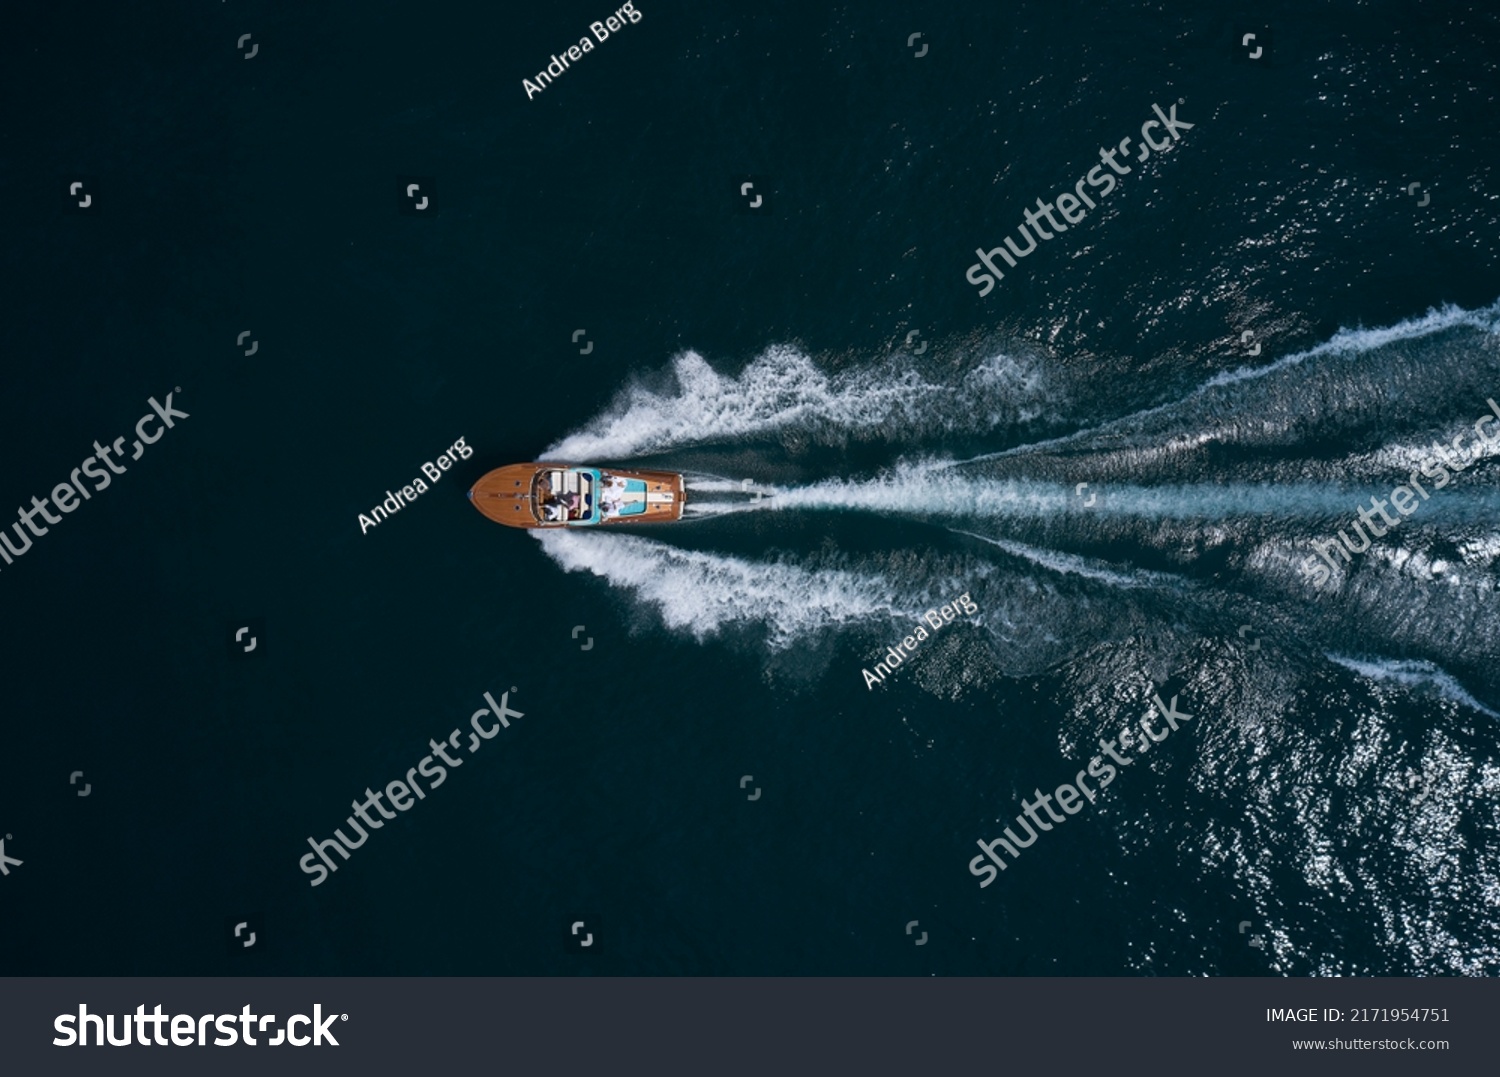 Modern wooden boat in a classic design, moving on water, aerial view. Luxurious wooden boat with people moves on dark water top view. Italian classic wooden boat fast movement on the water top view. #2171954751